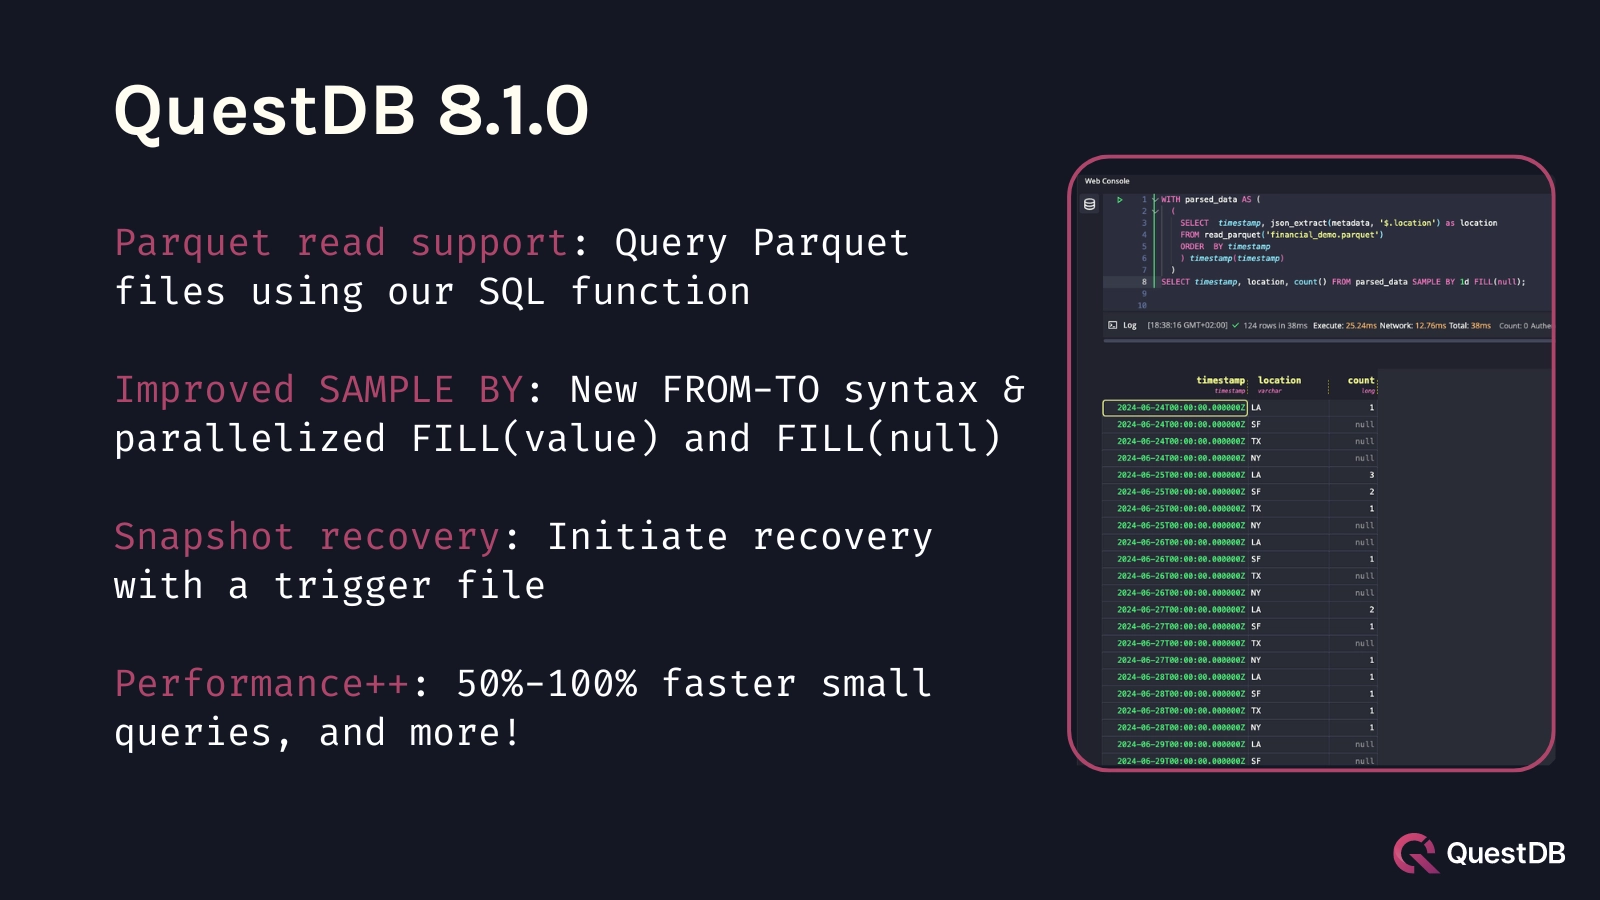 Banner for blog post with title "QuestDB 8.1.0 - Parquet, smarter snapshots, improved SAMPLE BY, and more"